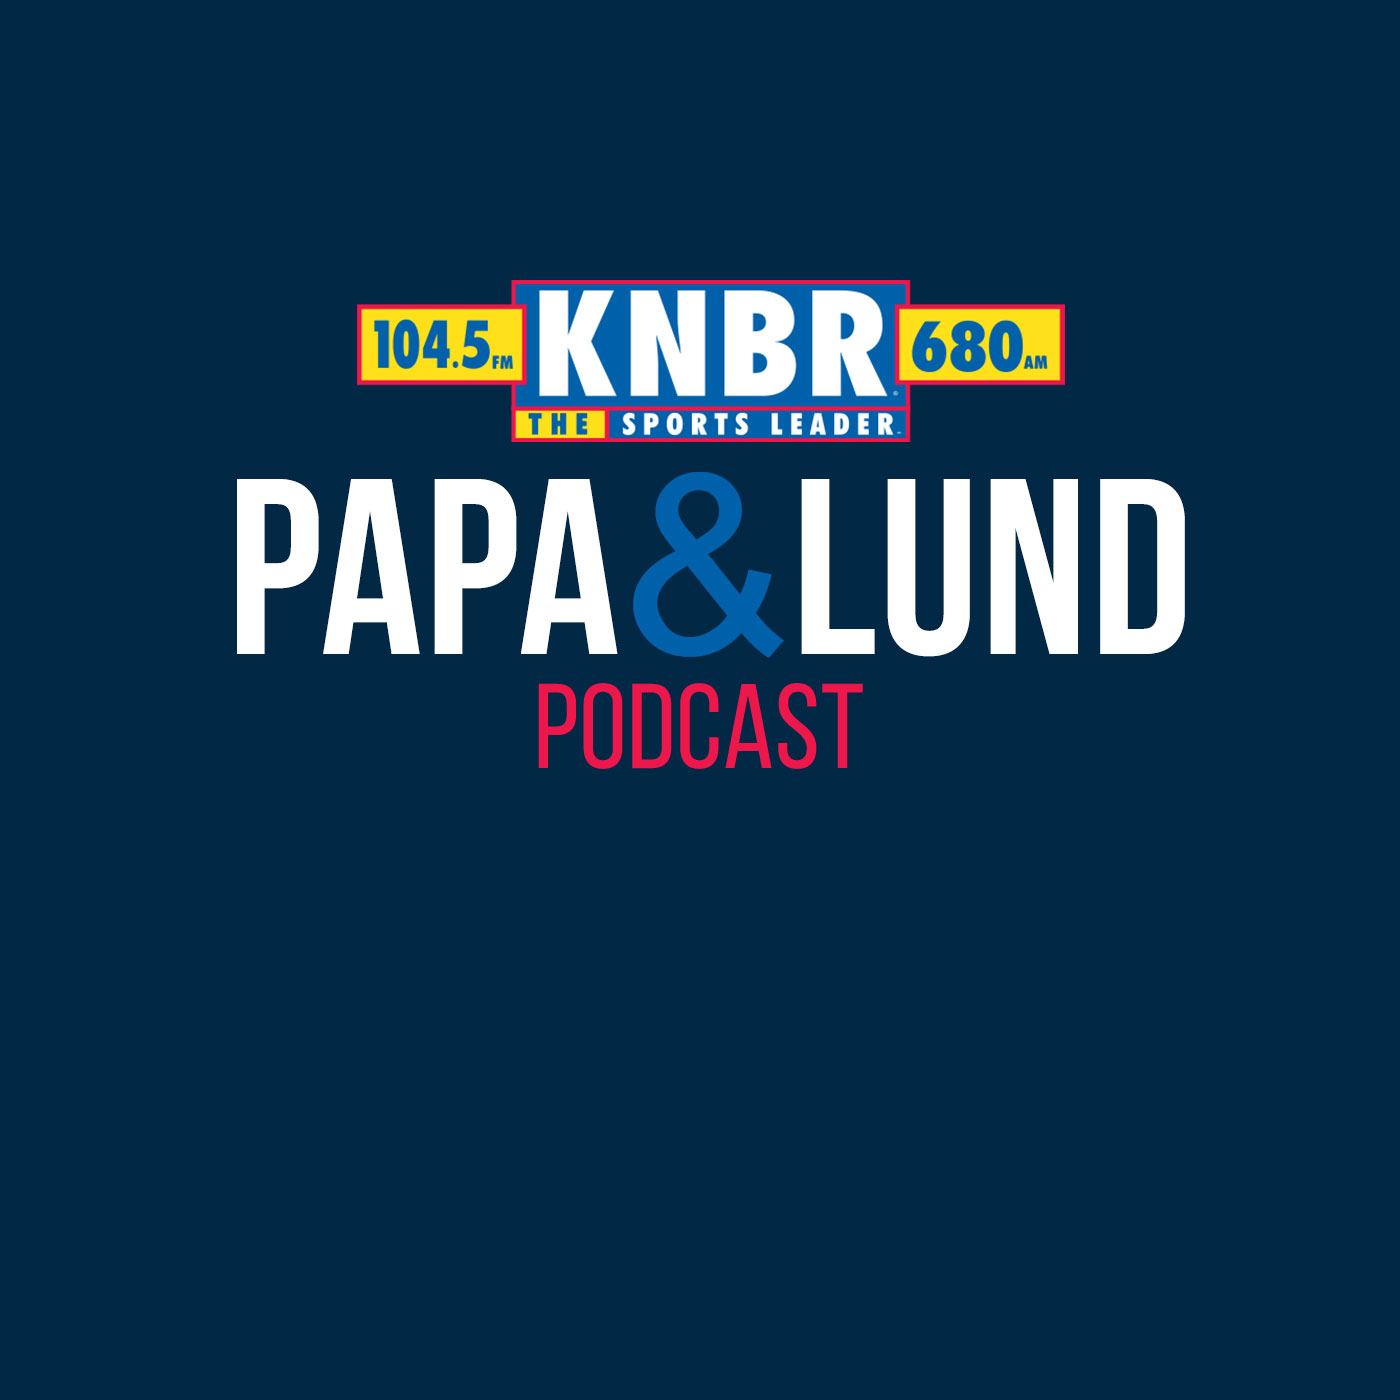 2-23 Keith Law joins Kolsky & FP to discuss the Giants top prospects in the system as well as what the path to the big leagues for Kyle Harrison looks like in 2023